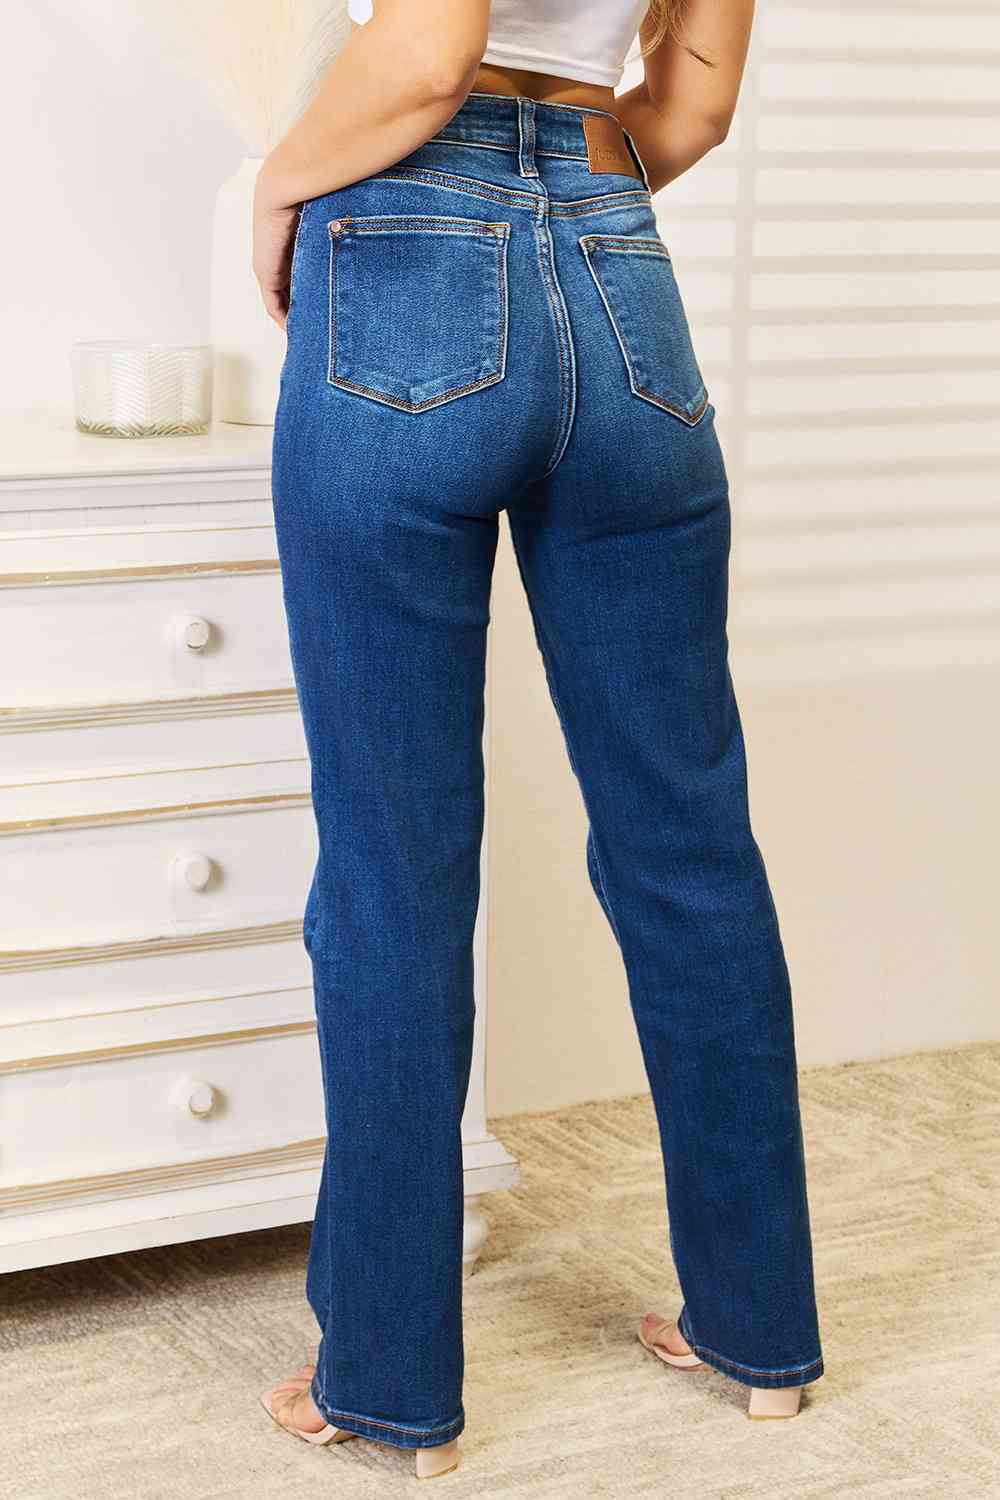 Judy Blue Full Size Straight Leg Jeans with Pockets - Fashion Girl Online Store